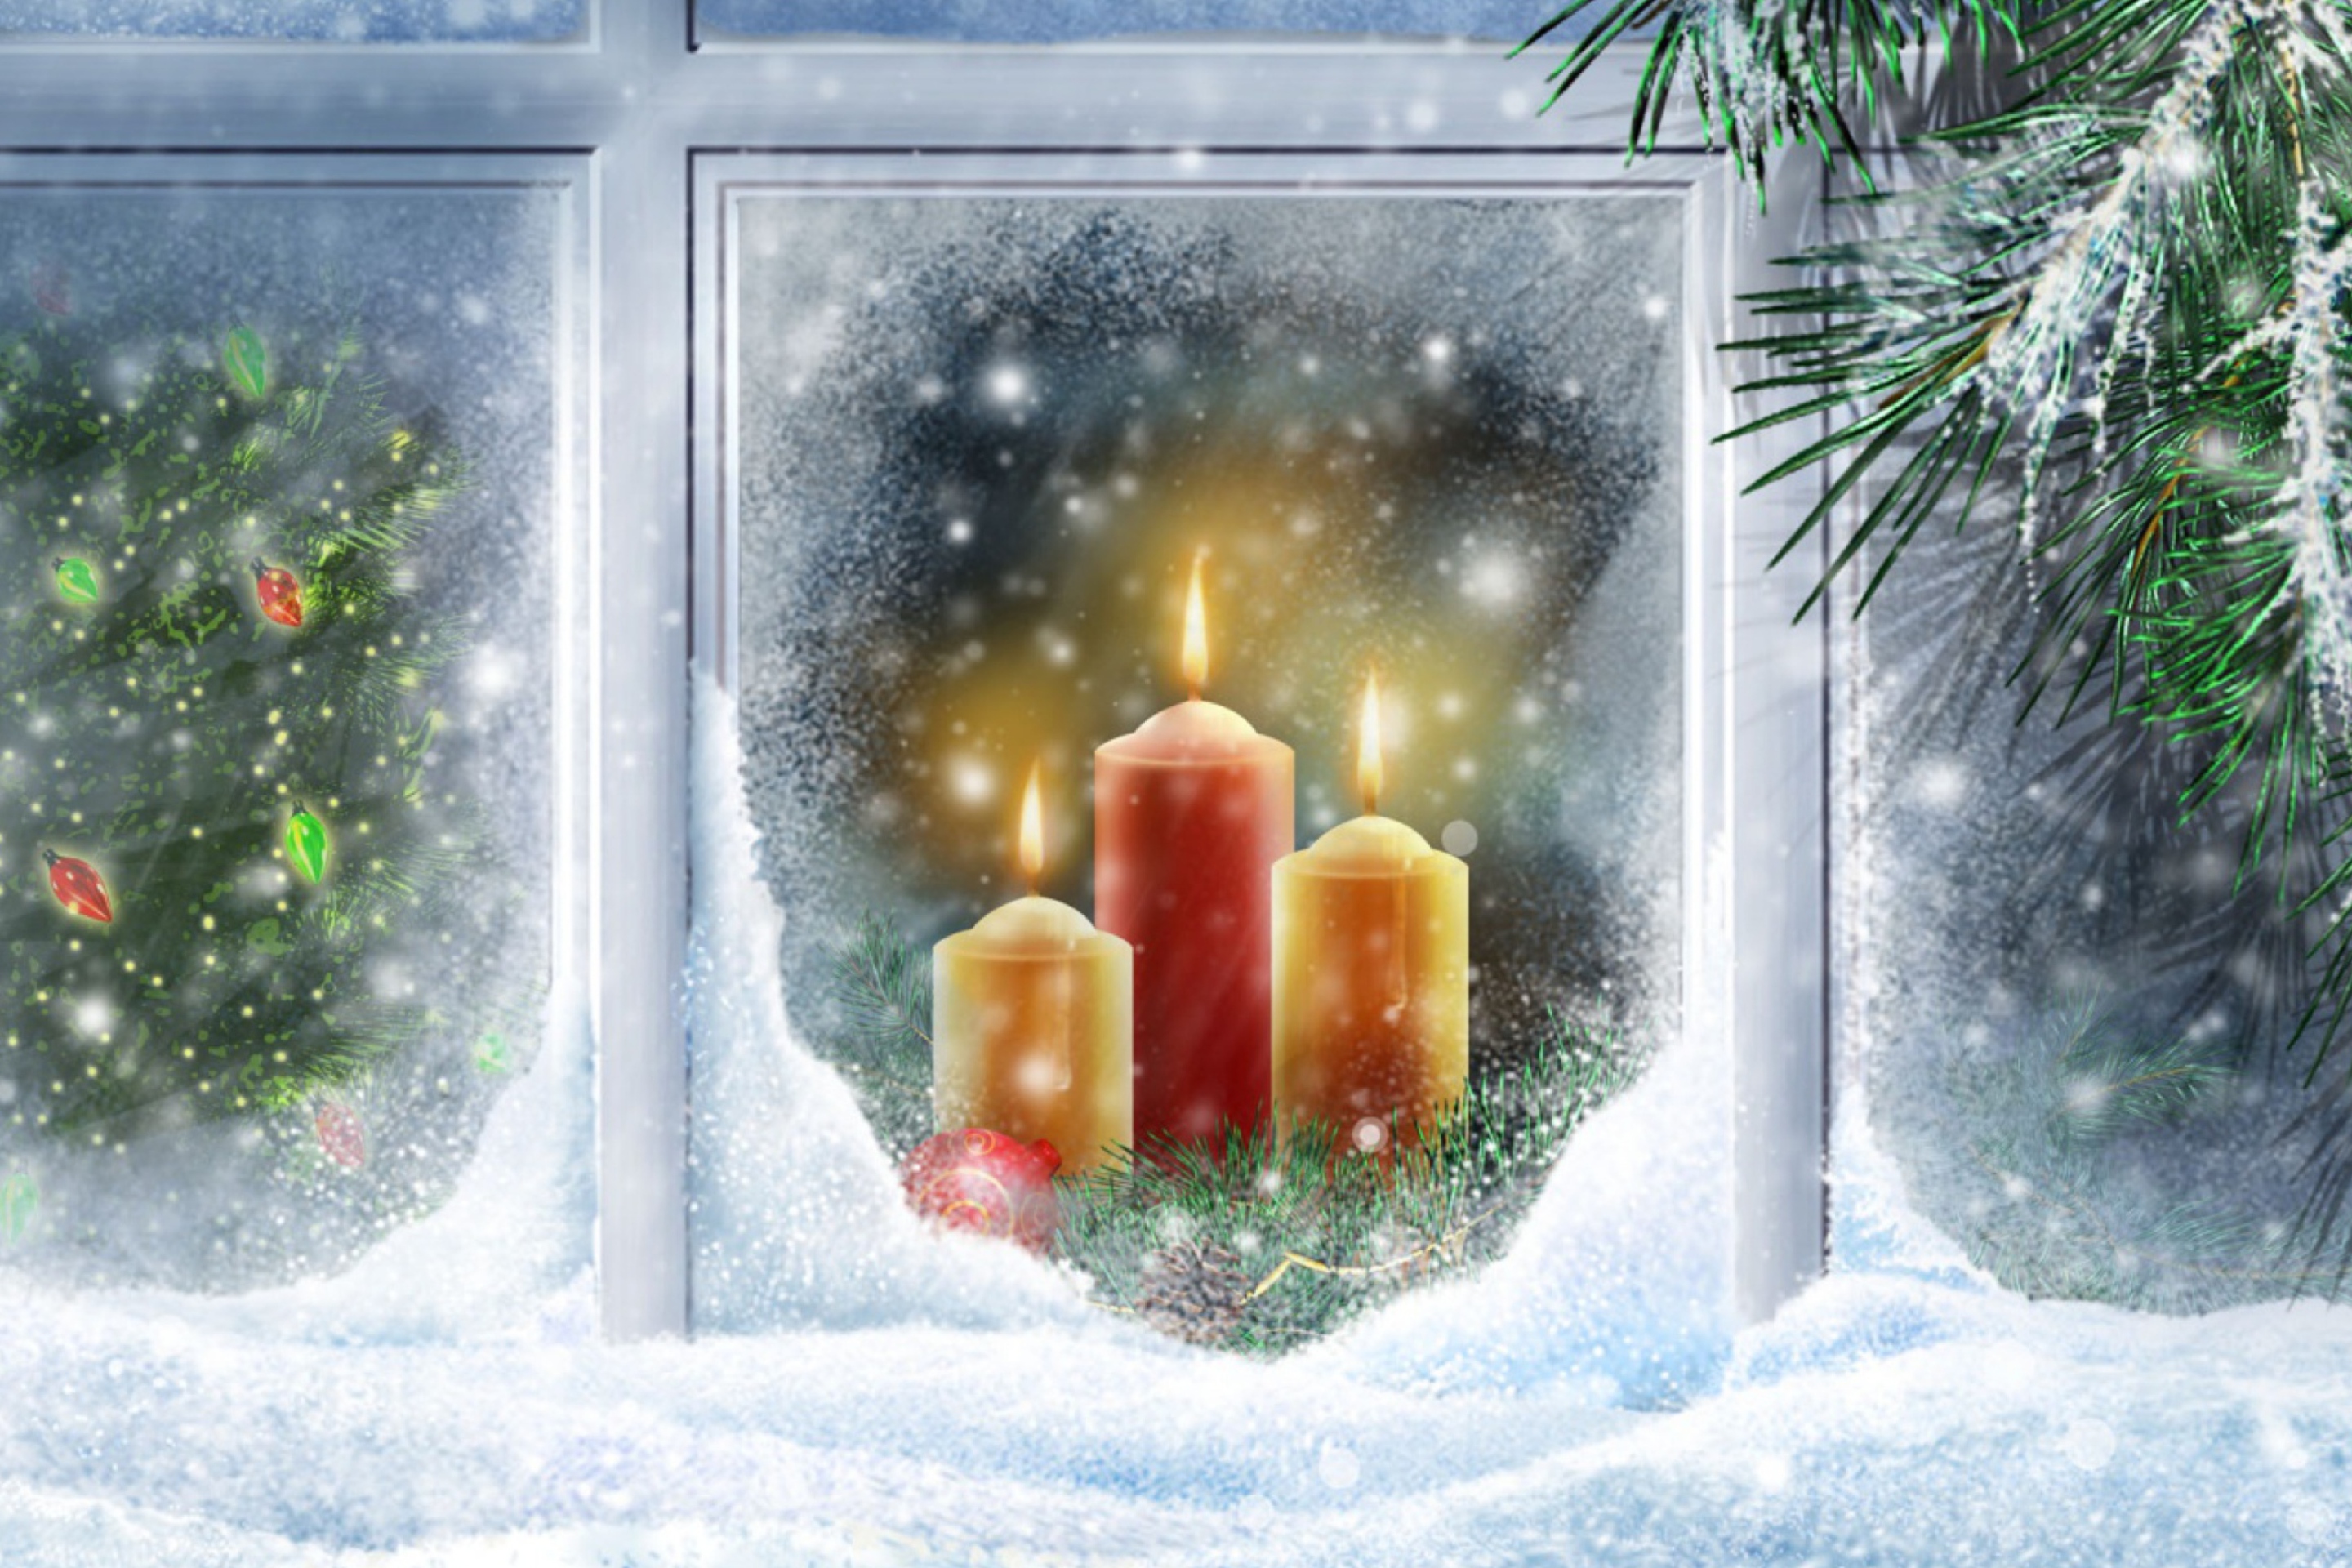 Special Wishes At Christmas wallpaper 2880x1920